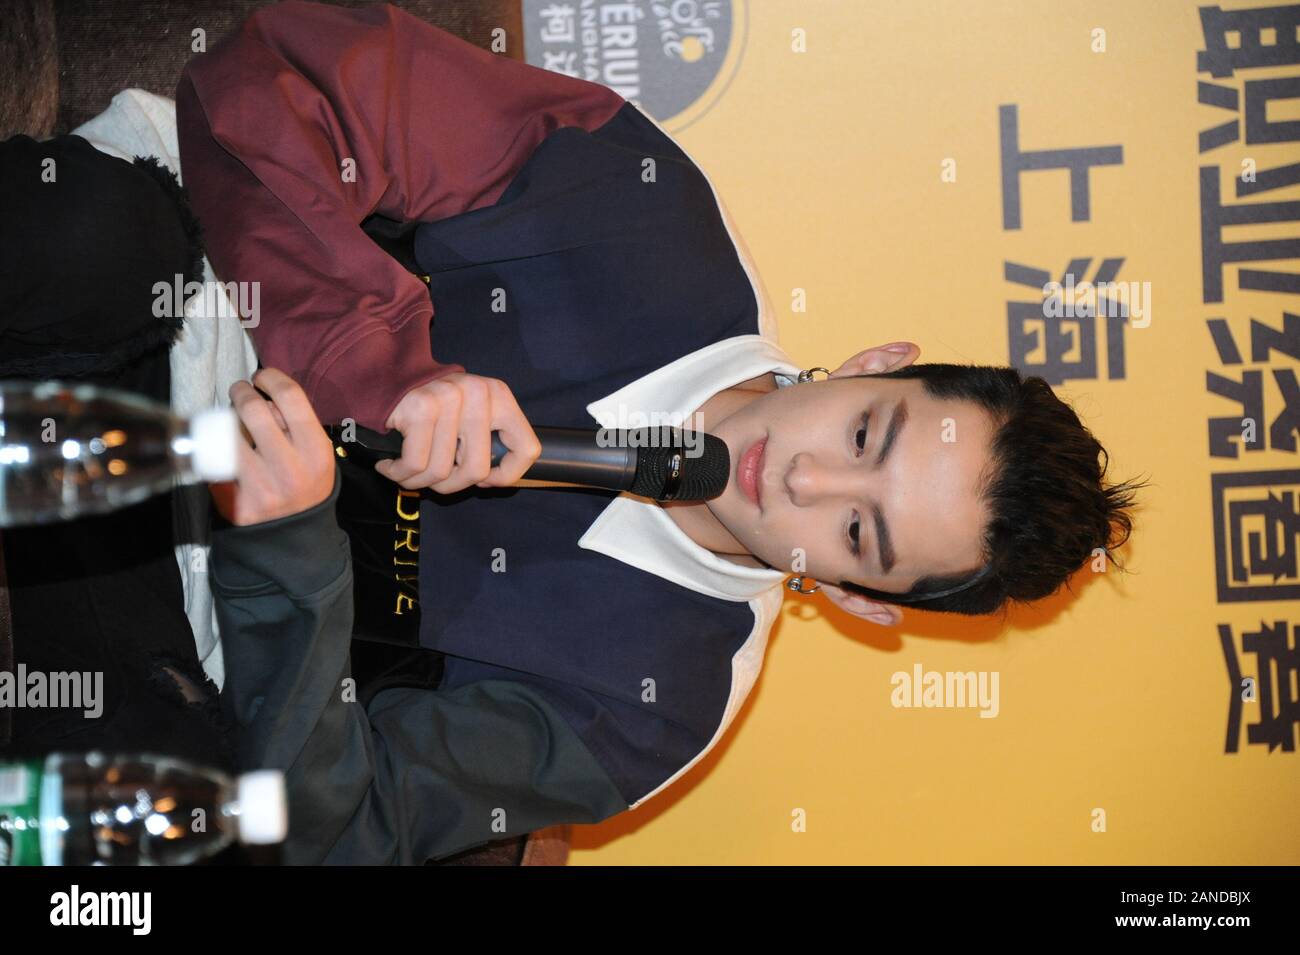 FILE--Chinese actor Dylan Wang Hedi of the new lineup of Chinese boy group  F4 attends a promotional event of Tour de France Skoda Shanghai Criterium  Stock Photo - Alamy